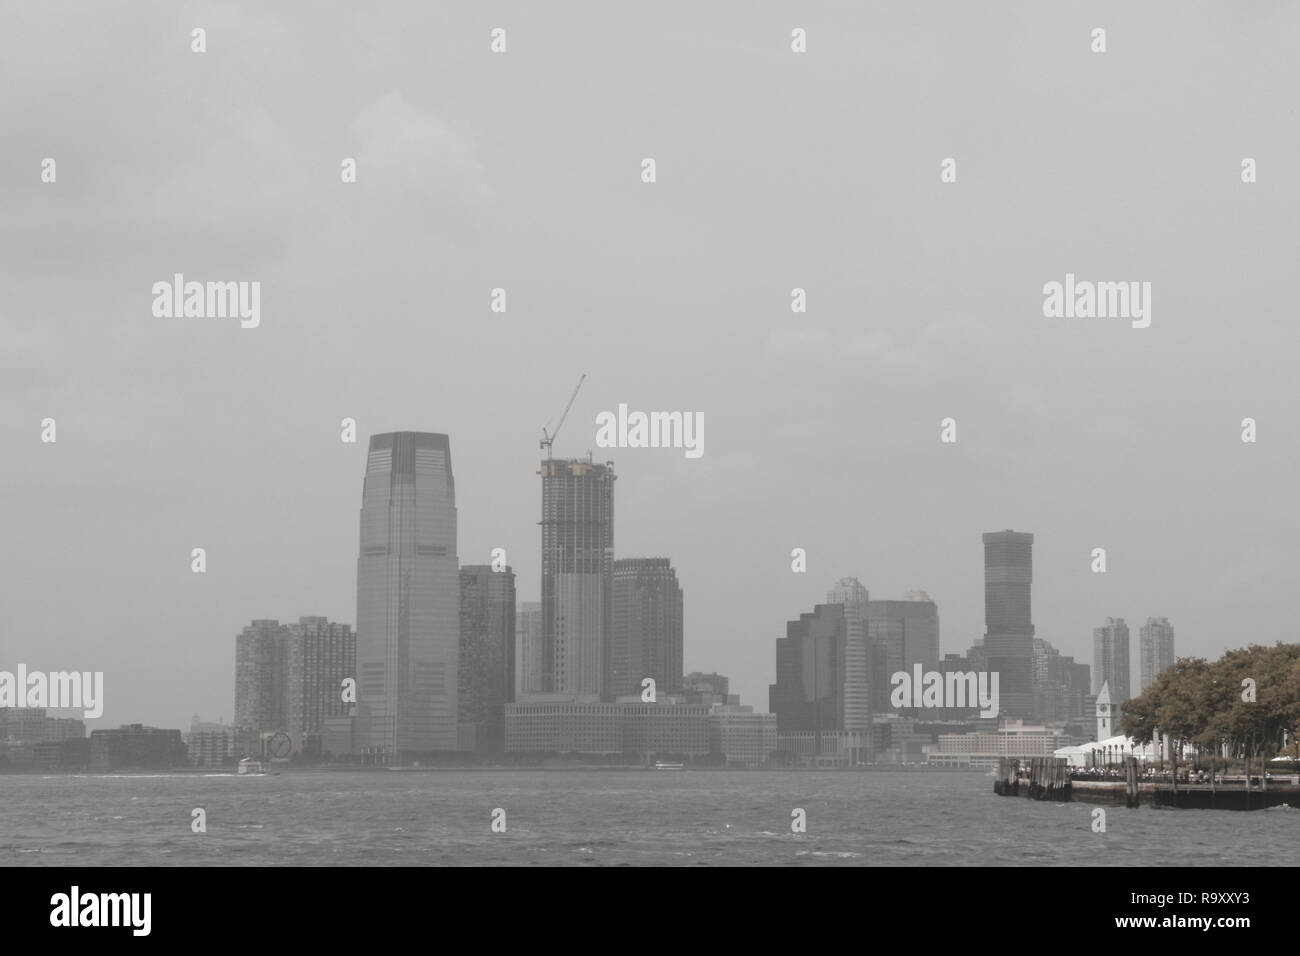 NEW YORK, USA - August 31, 2018: Cloudy day in New York. View of Manhattan skyline in NYC Stock Photo